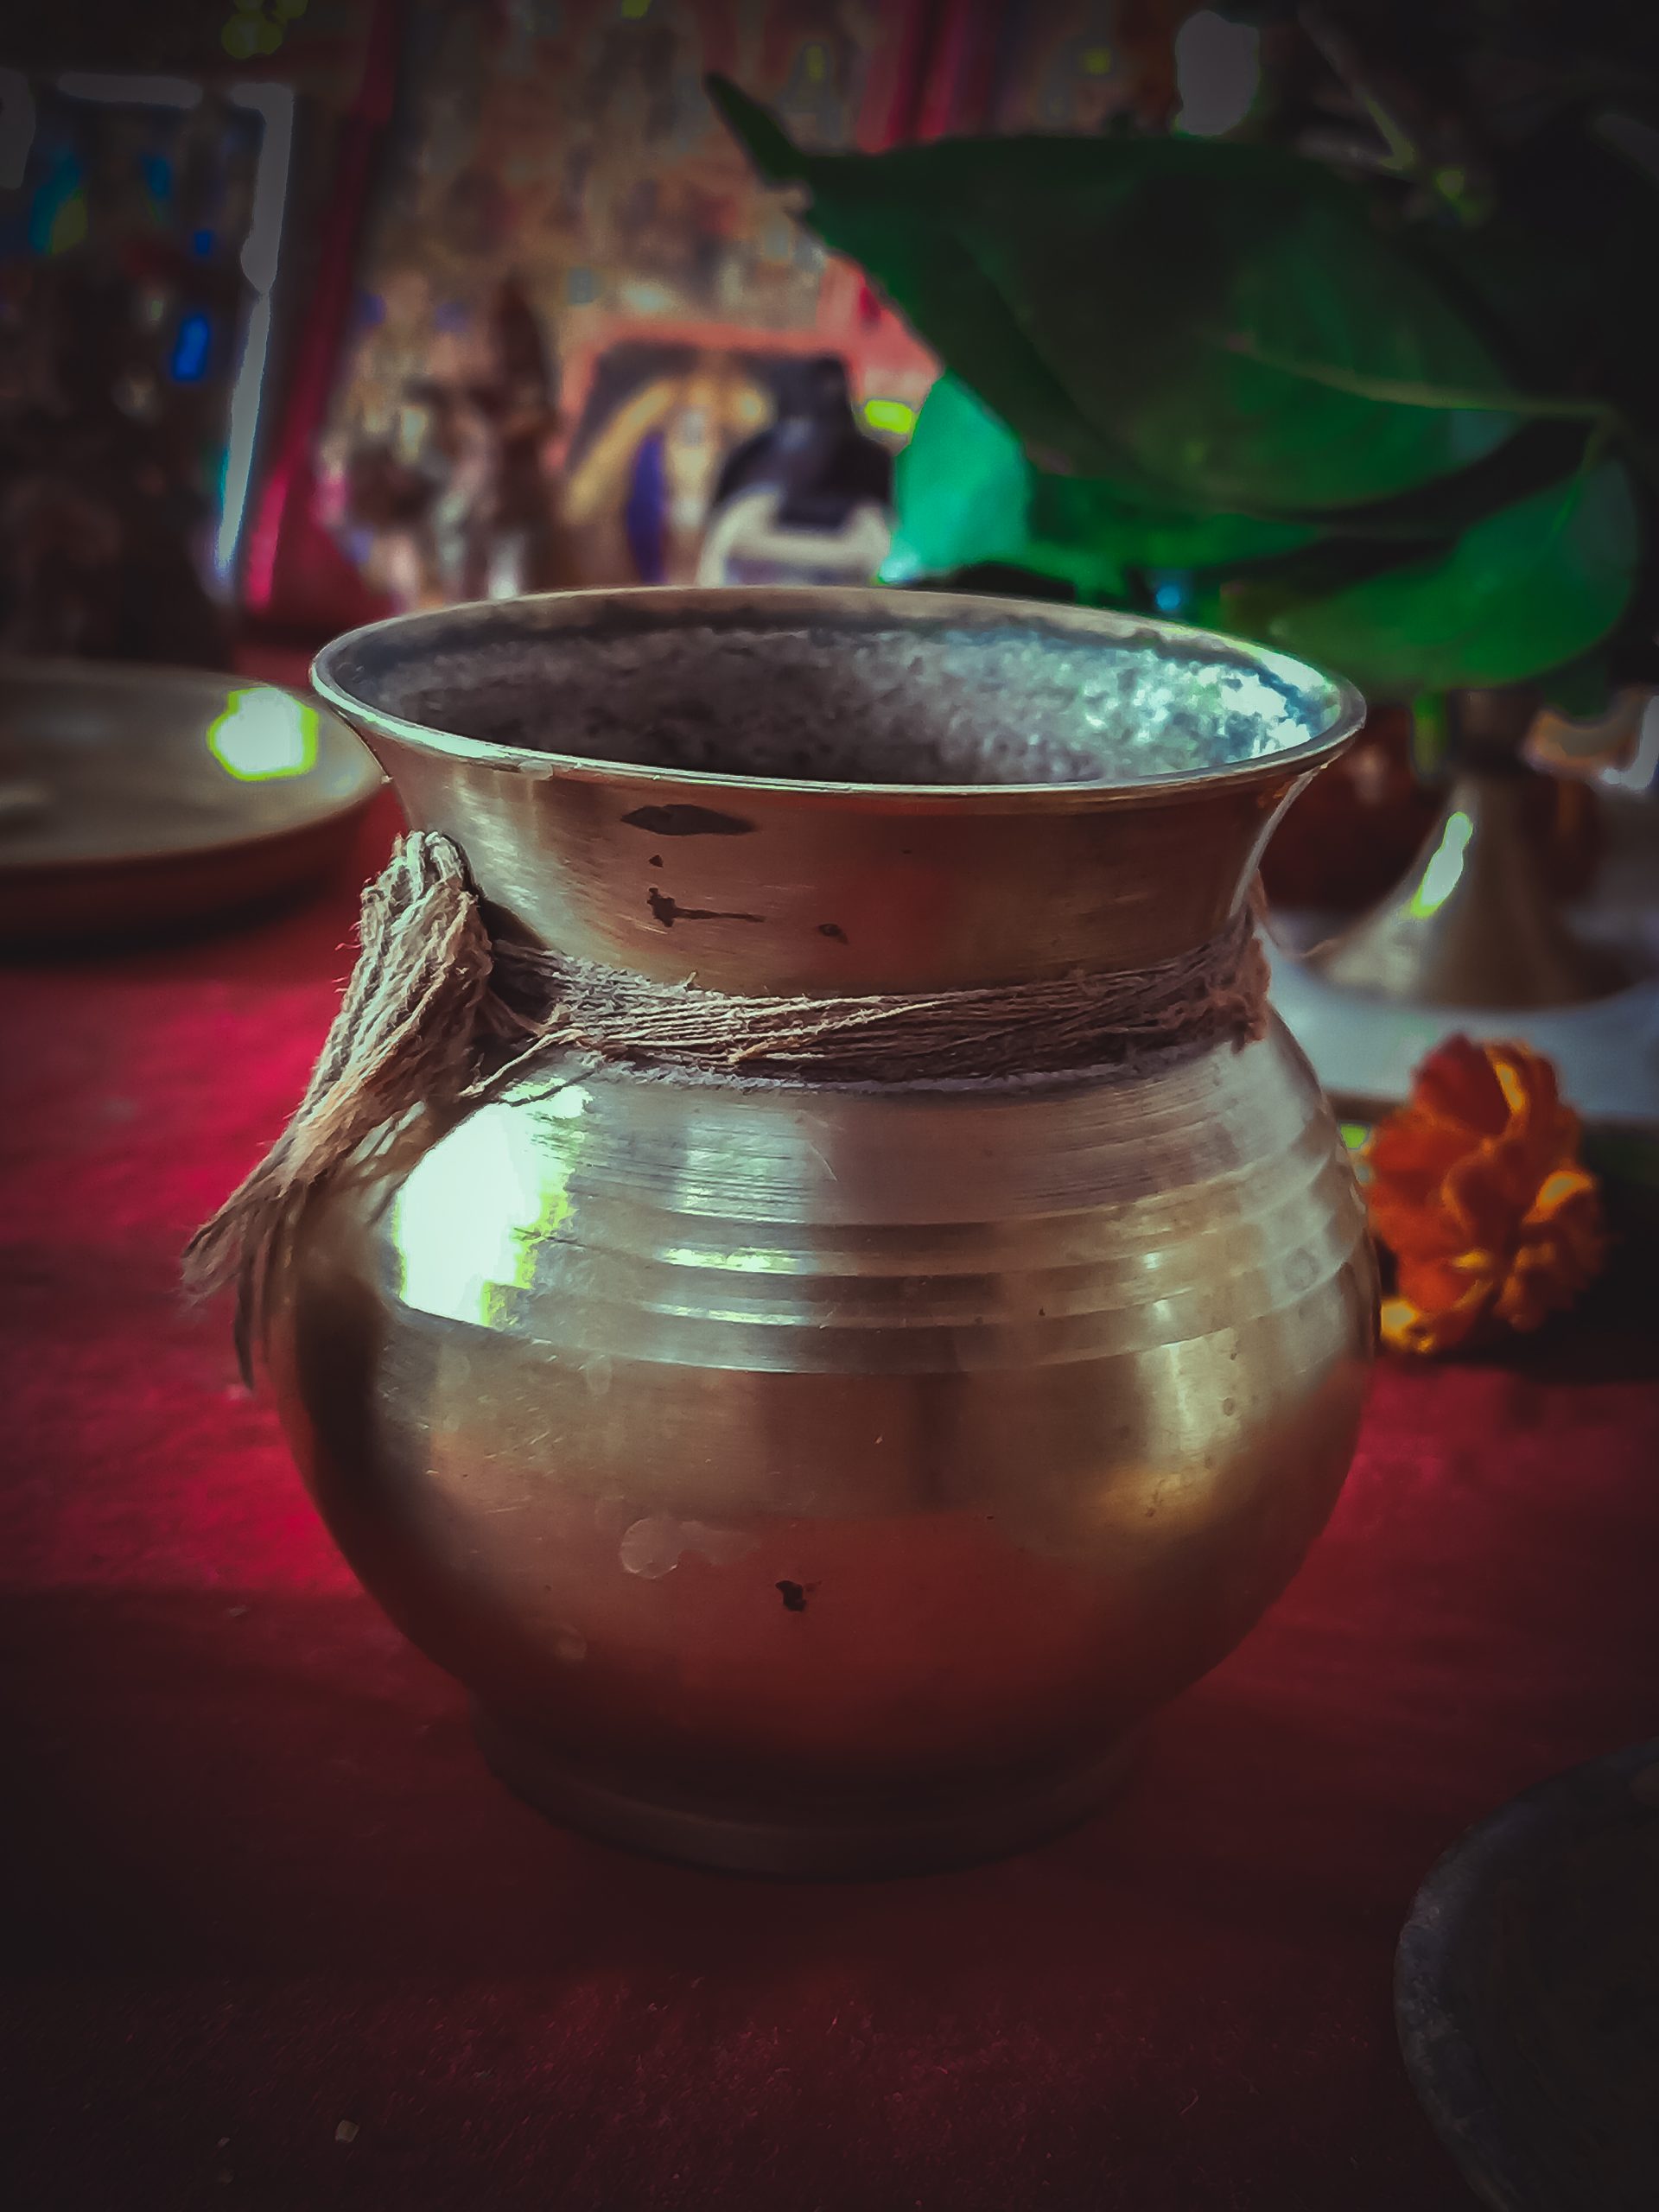 Ewer with a holy water on a religious event